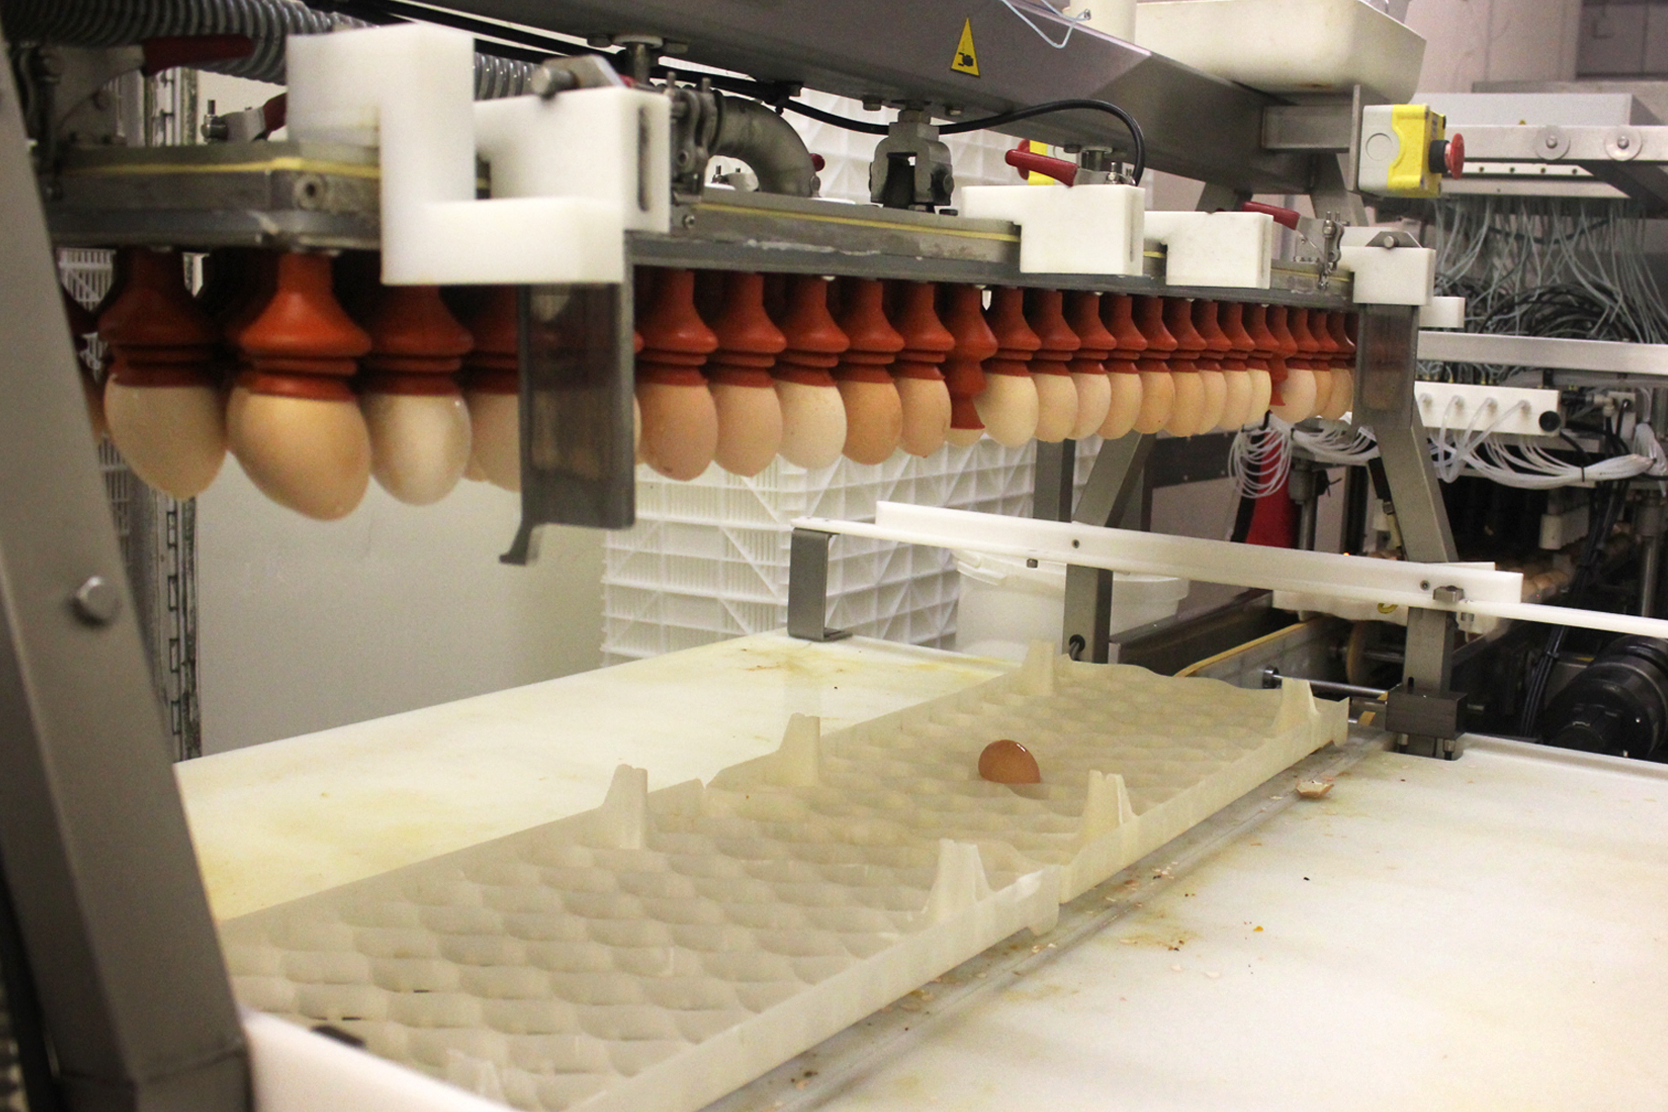 When the chicks are almost ready to hatch, they go through a vaccination robot. Photo: Dan Charles/NPR